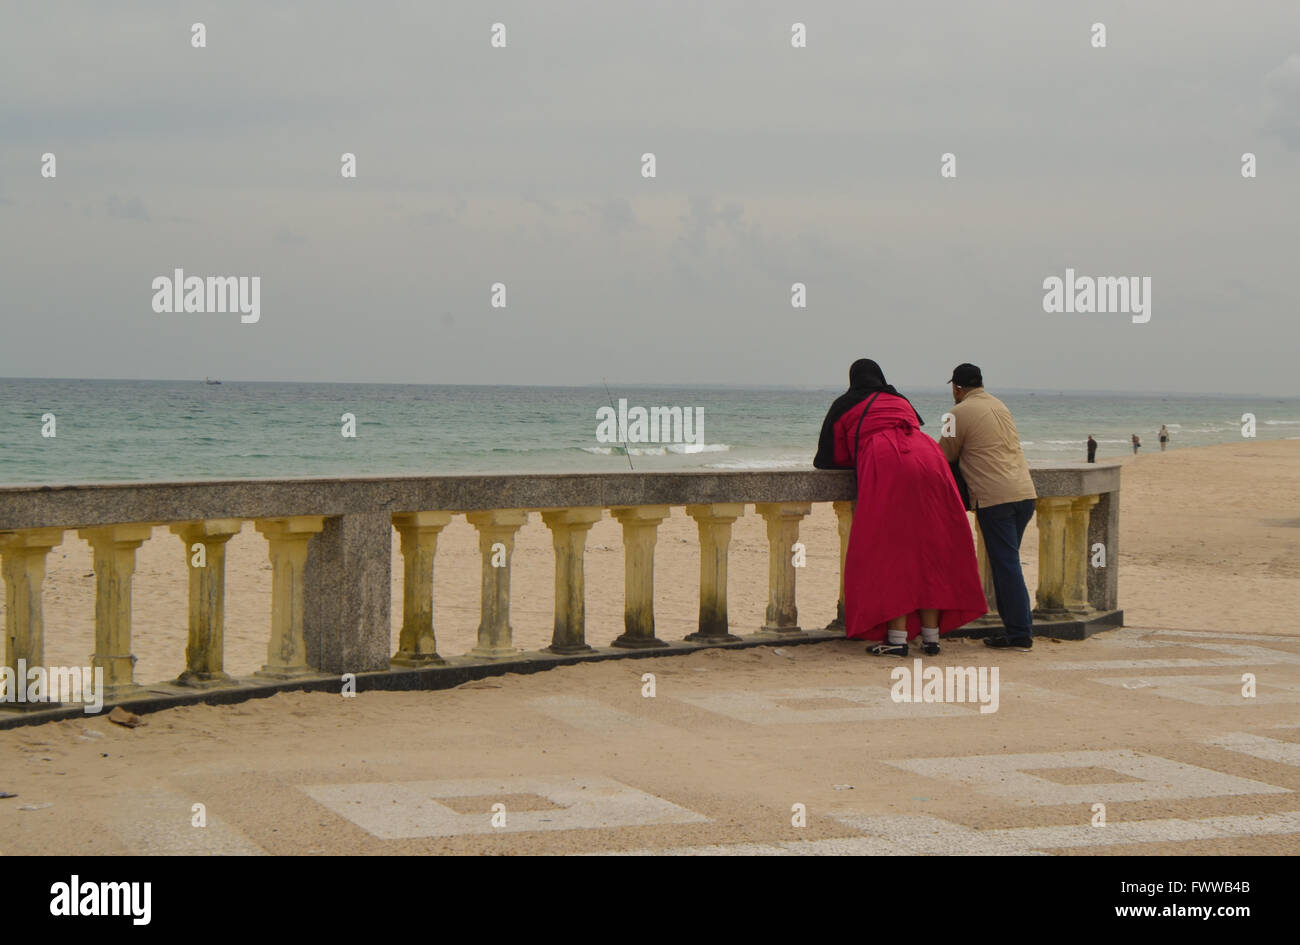 Muslim couple on the beach . The woman is dressed in red burka. The sea is  calm. Stock Photo